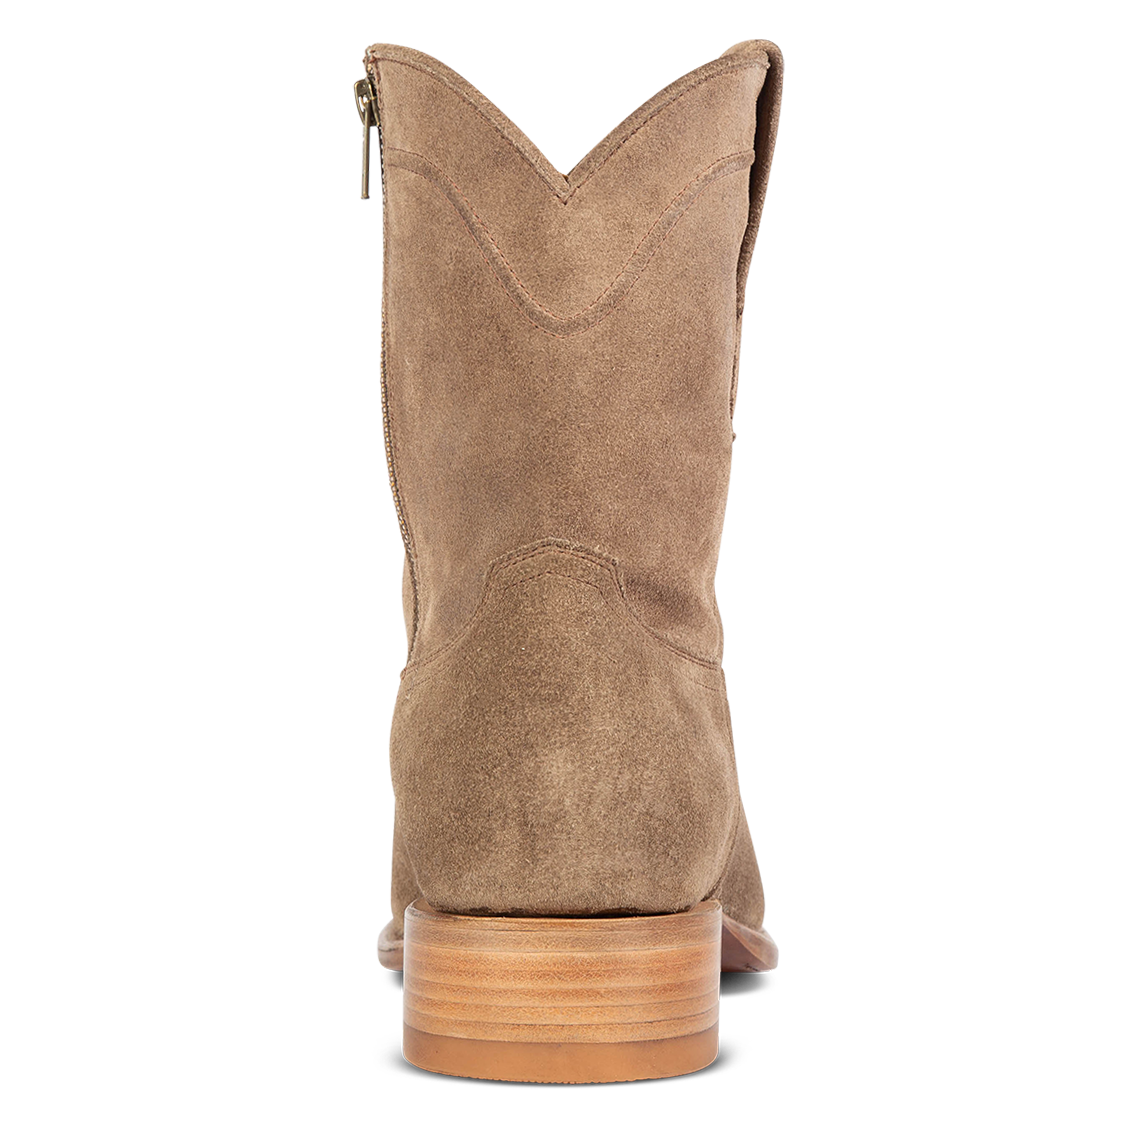 Back view showing low heel on FREEBIRD men's Henderson taupe suede mid calf boot